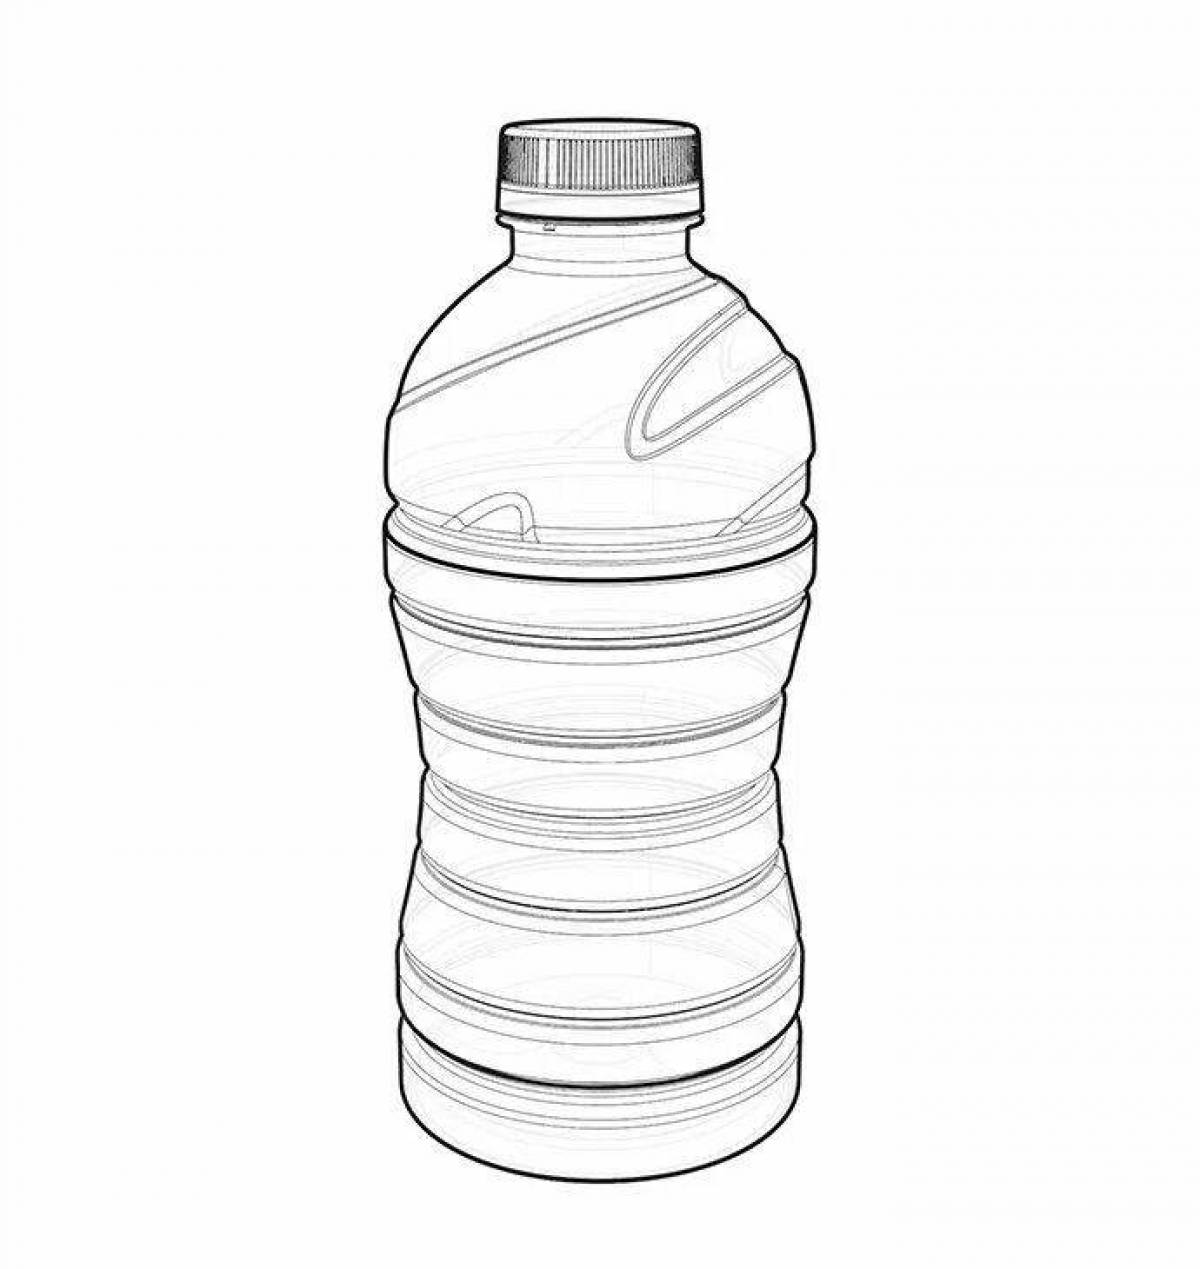 Bright bottle coloring page